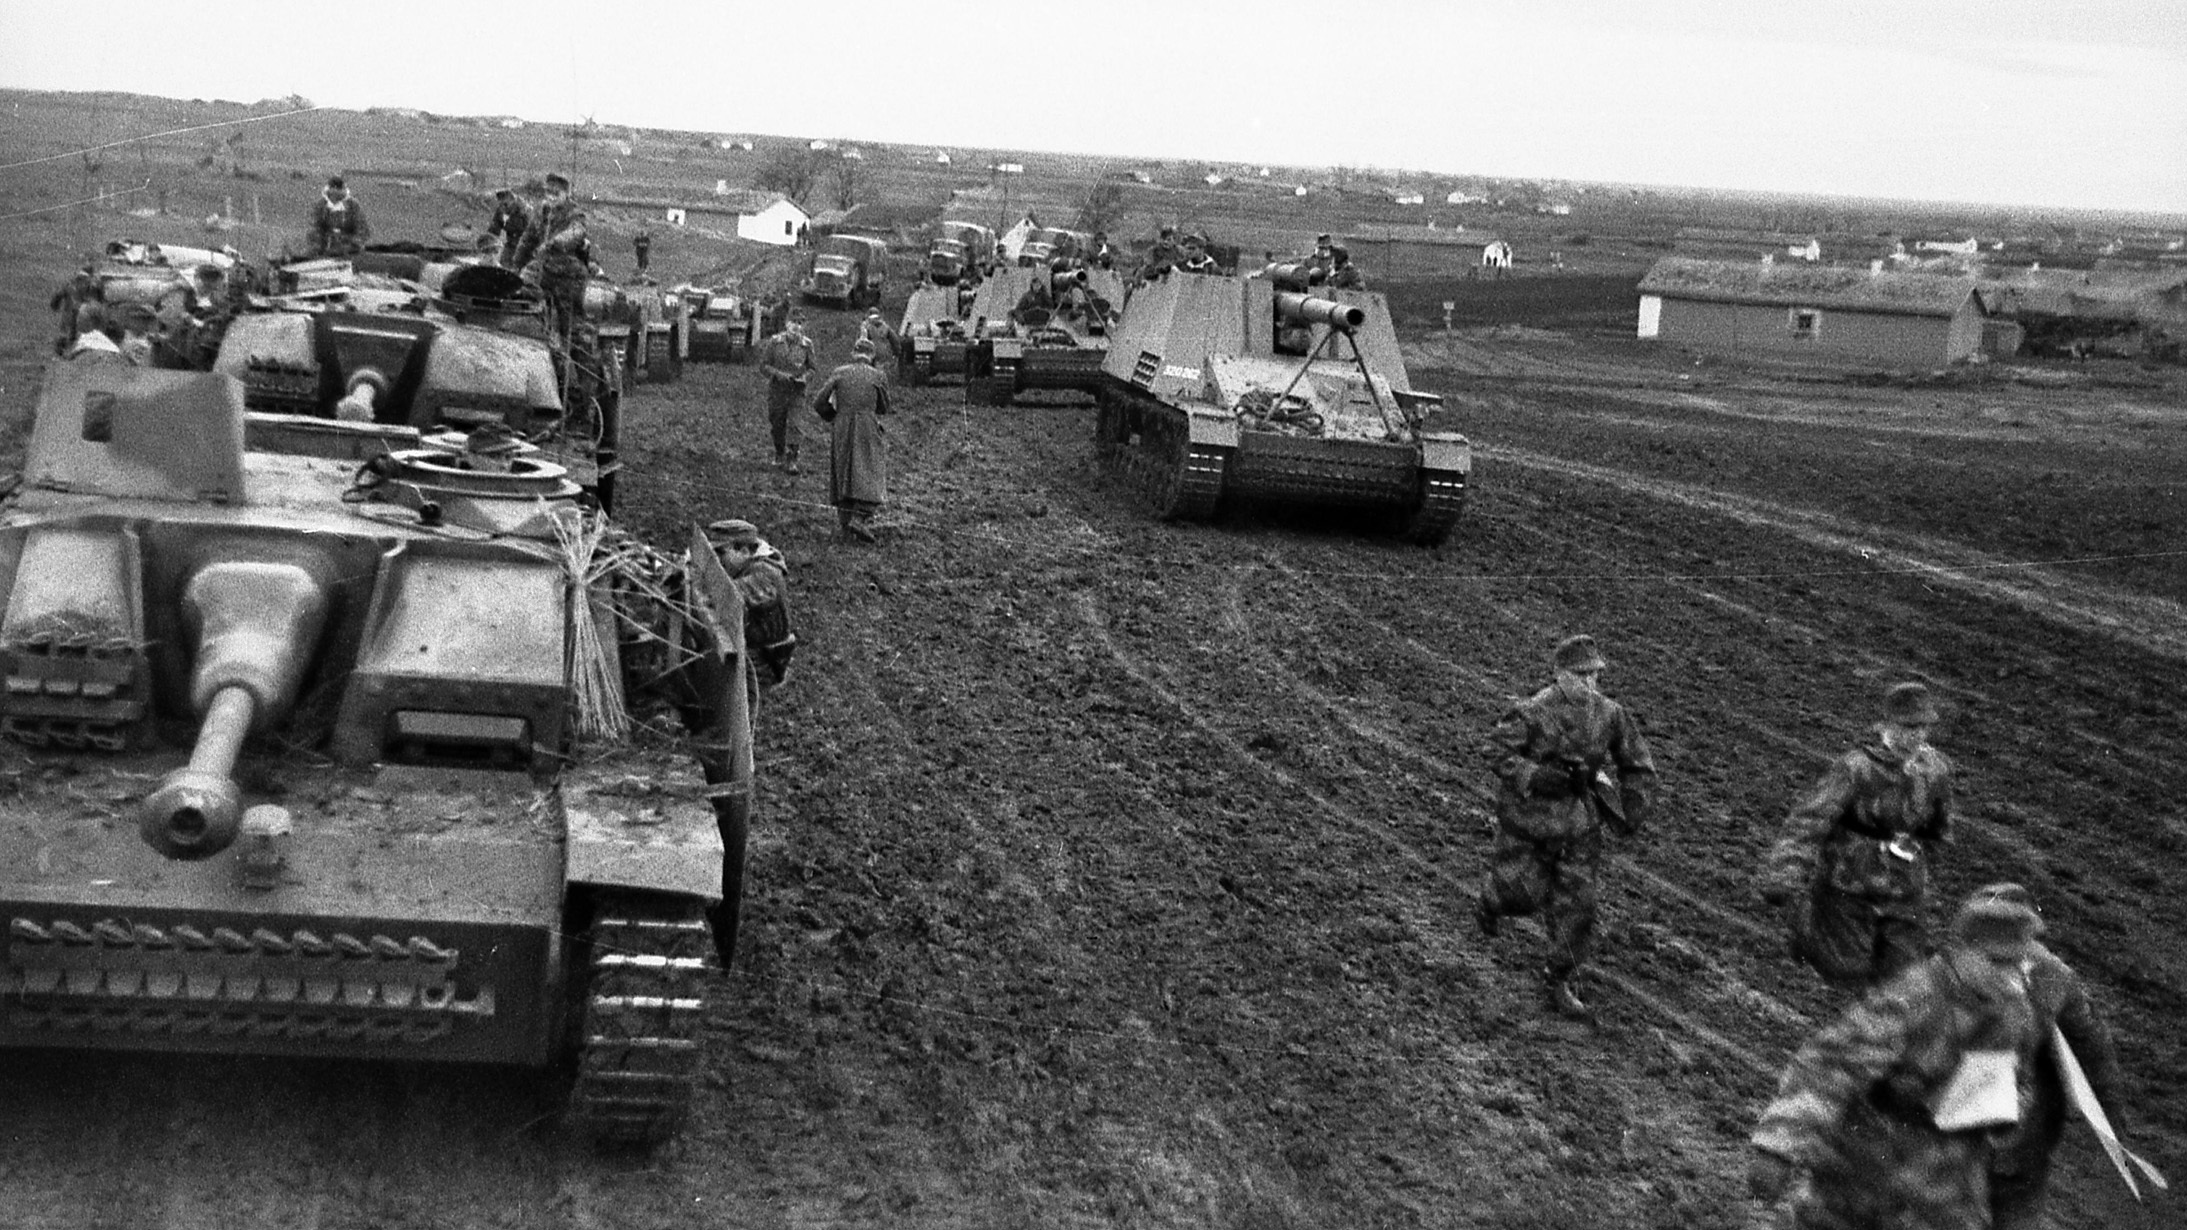 Traversing a muddy road on the outskirts of a Ukrainian village, two columns of German assault guns move toward the front lines. The vehicle to the left is the Sturmgeschütz III mounting a 75mm gun, and the vehicle on the right is the Hummel (Bumblebee) self-propelled 150mm howitzer.